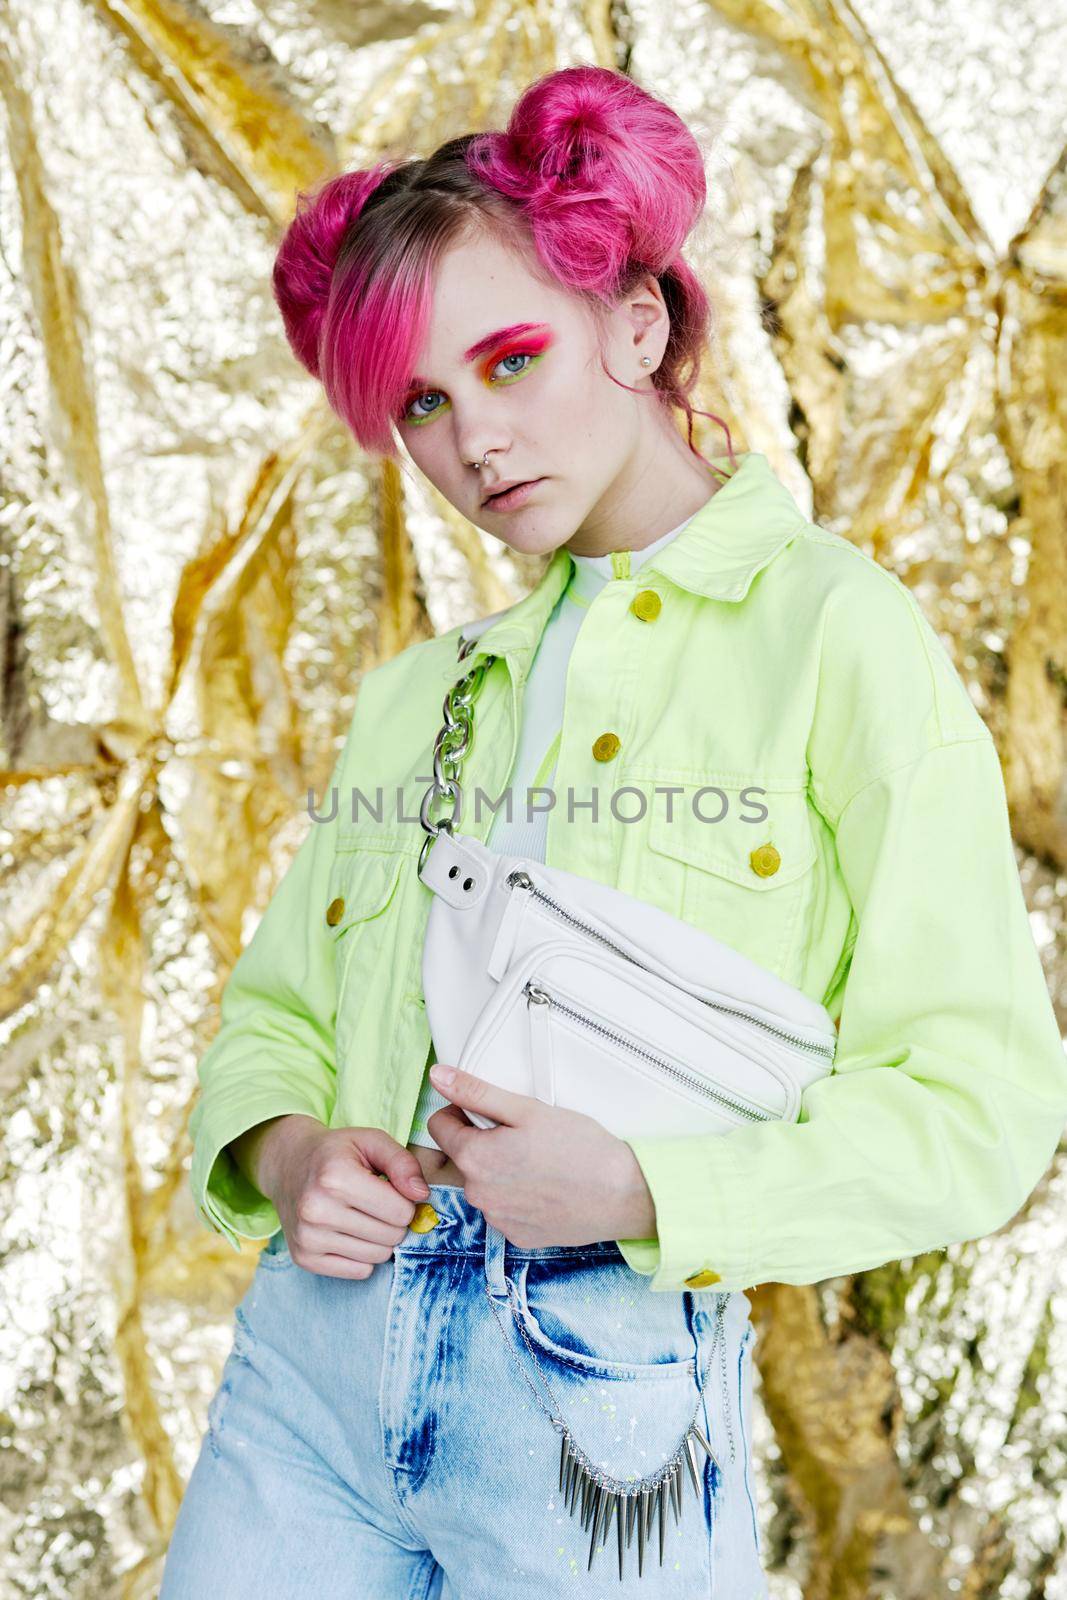 glamorous fashionable woman with pink hair posing hipster neon. High quality photo